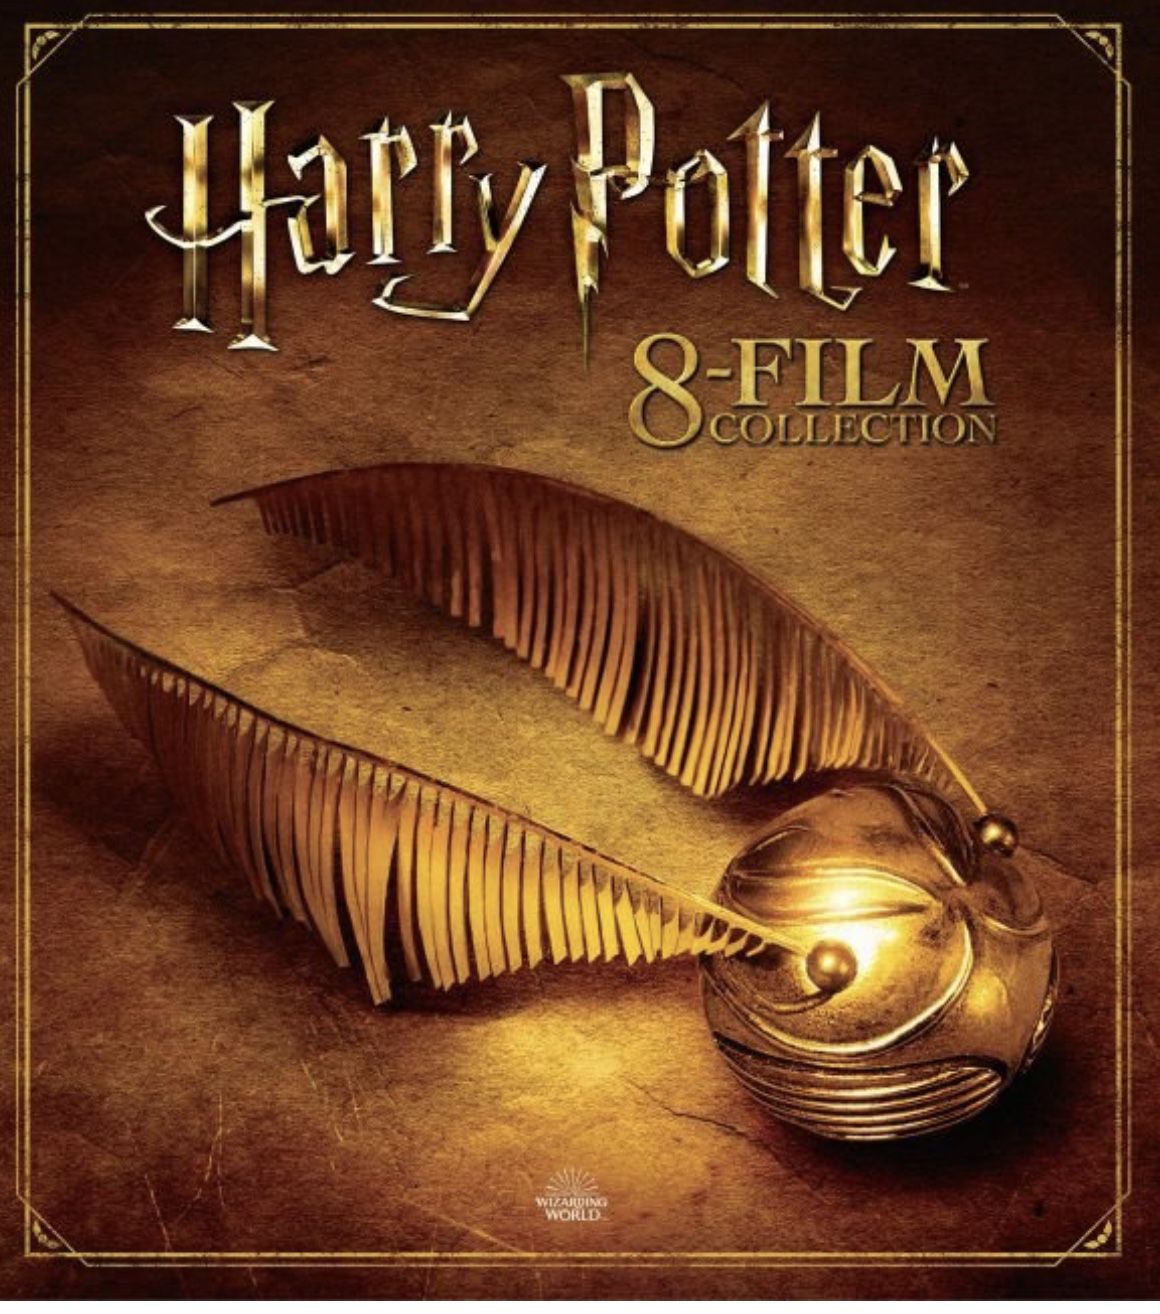 Harry Potter 8 Film Collection (Original Series) On Blu-Ray (New)